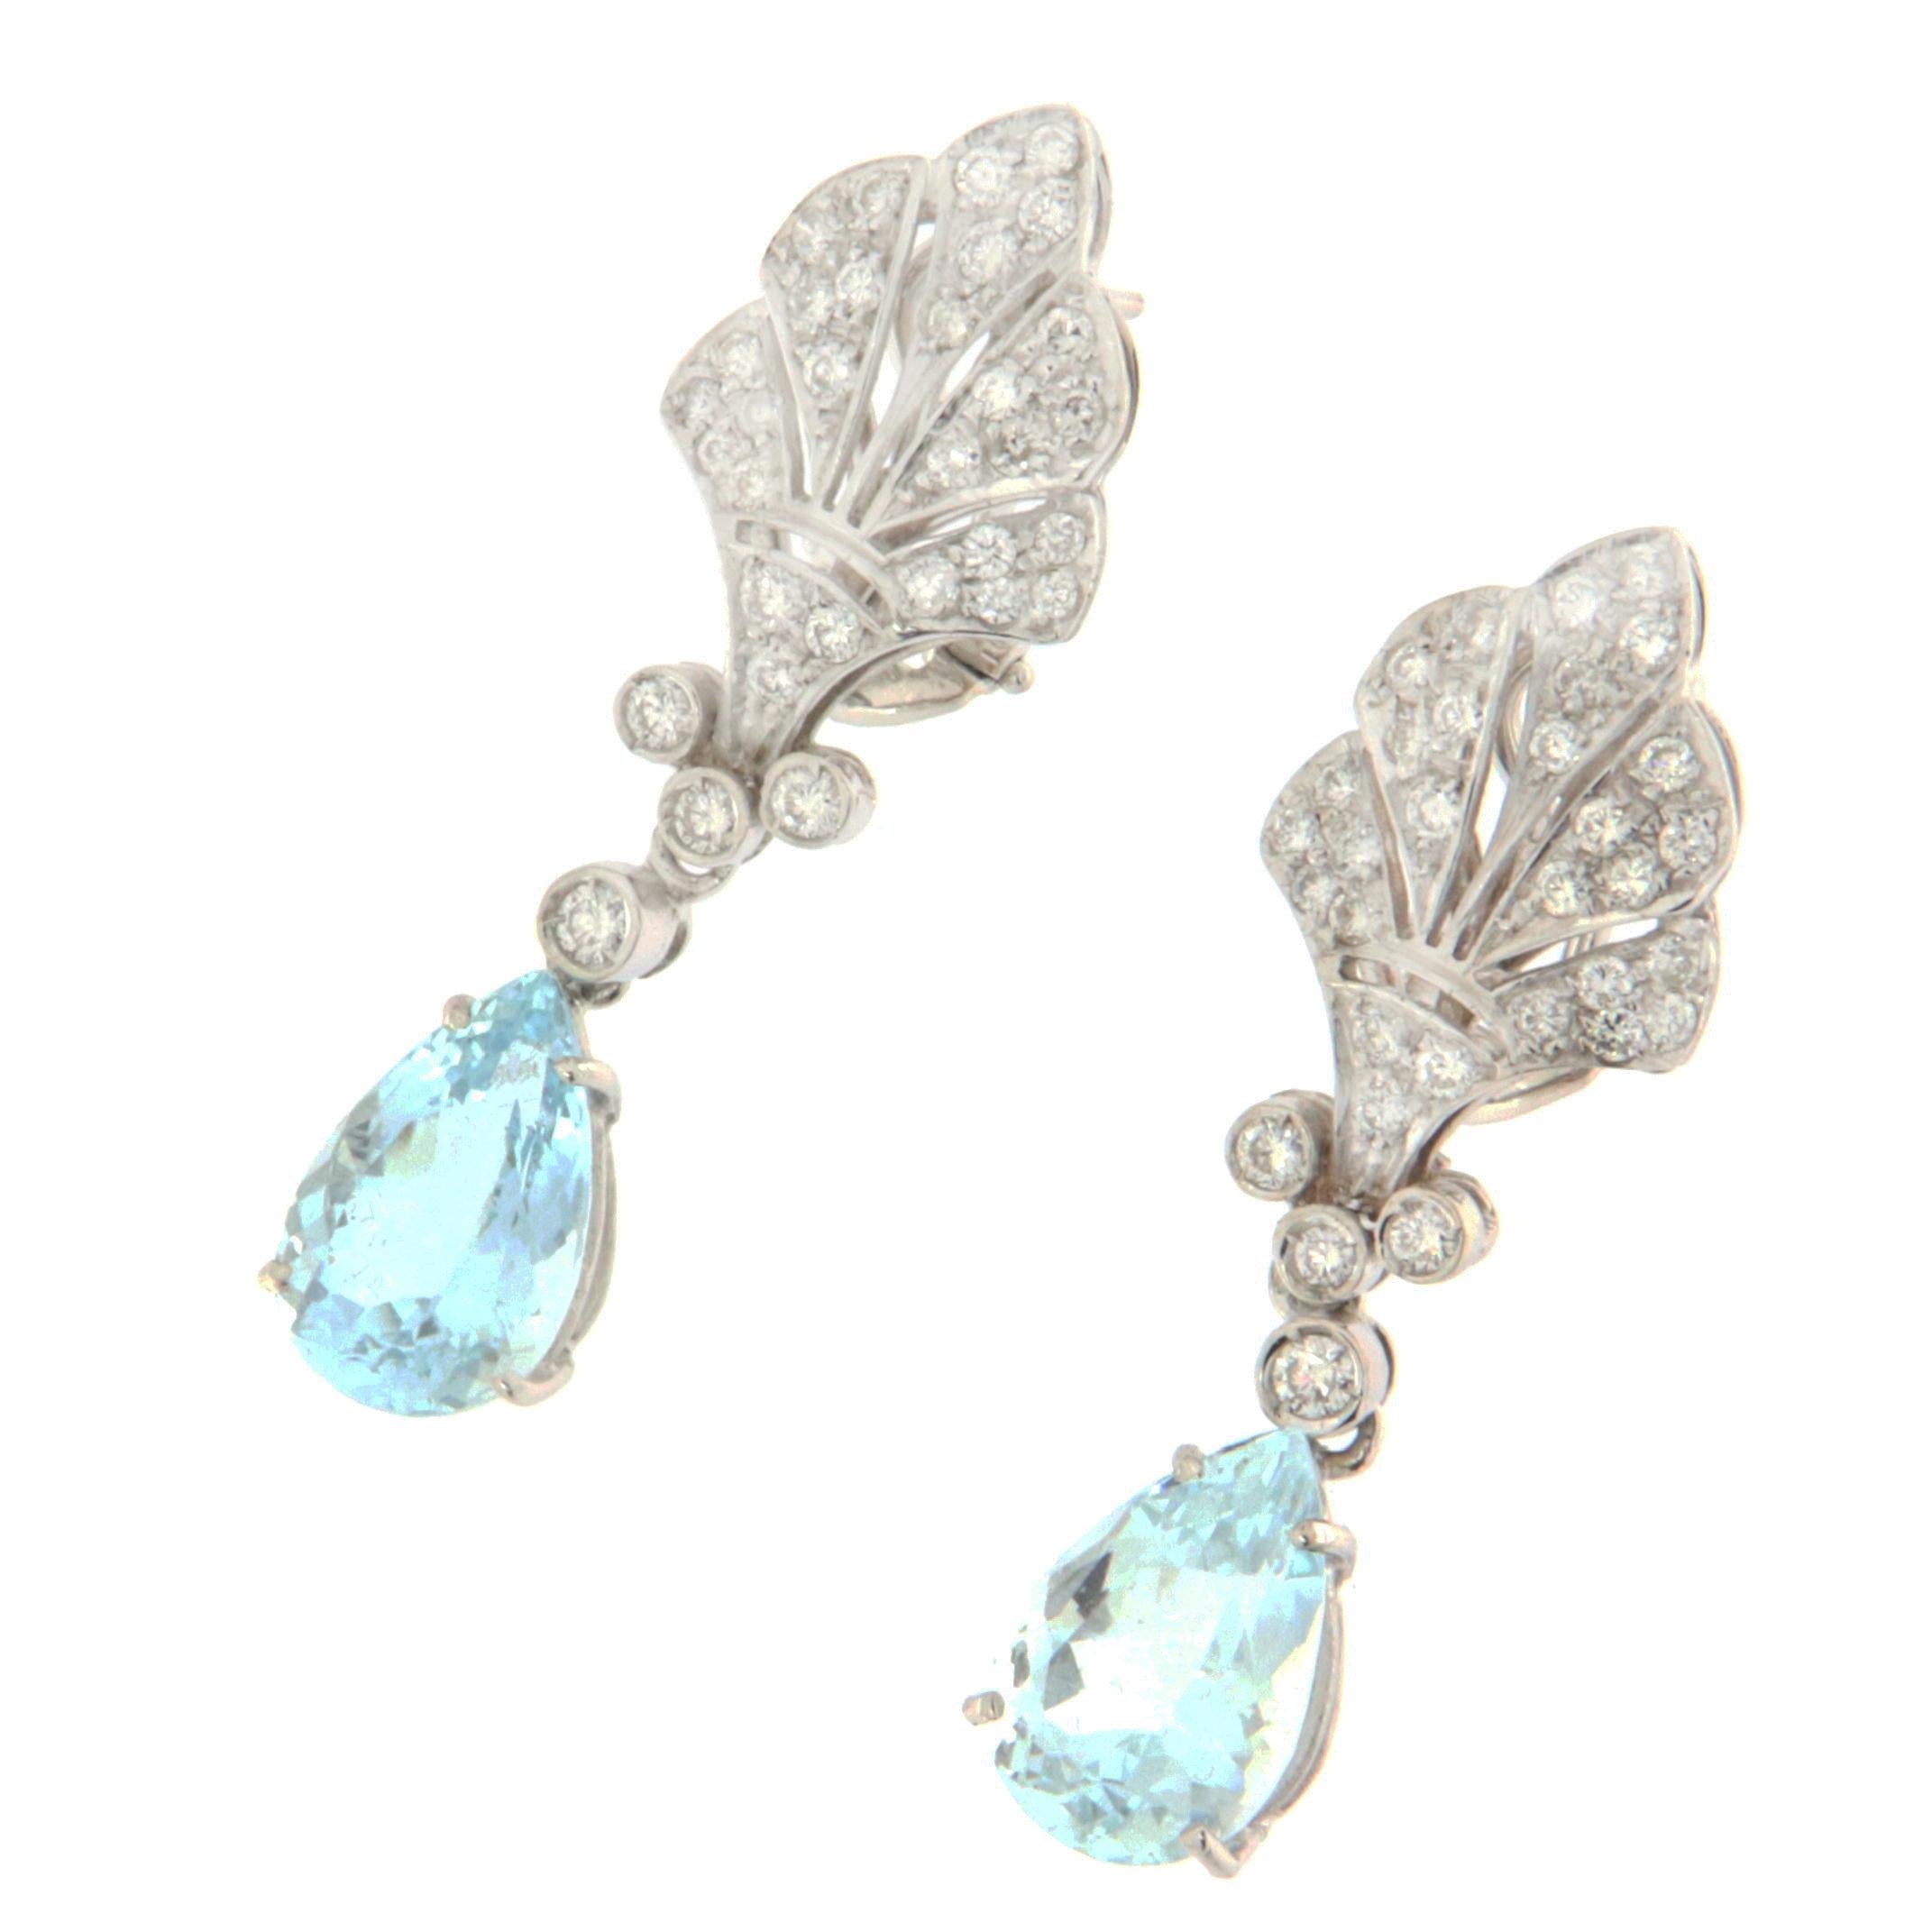 These refined earrings in 18-karat white gold symbolize sophisticated elegance, perfect for brightening any occasion with their splendor. At the heart of these jewels hang majestic Brazilian aquamarine drops, chosen for their crystal-clear blue